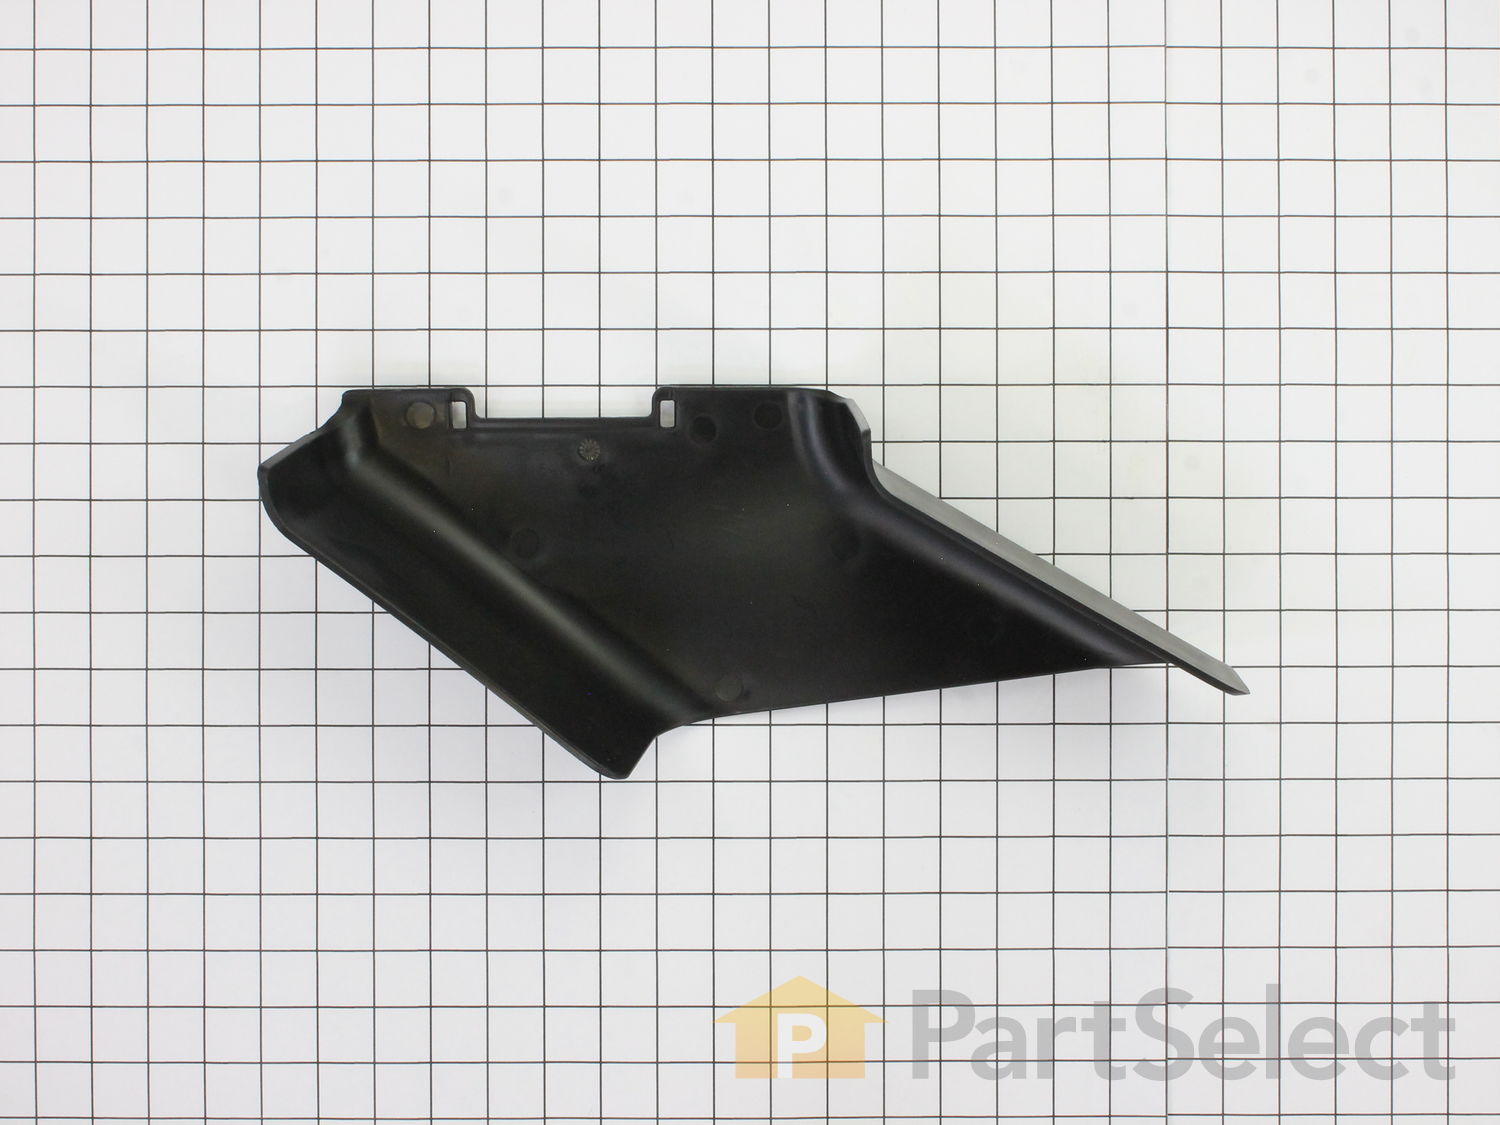 Genuine OEM Replacement part For Toro Lawn mower # 115-8447 CHUTE-DISCHARGE SIDE 